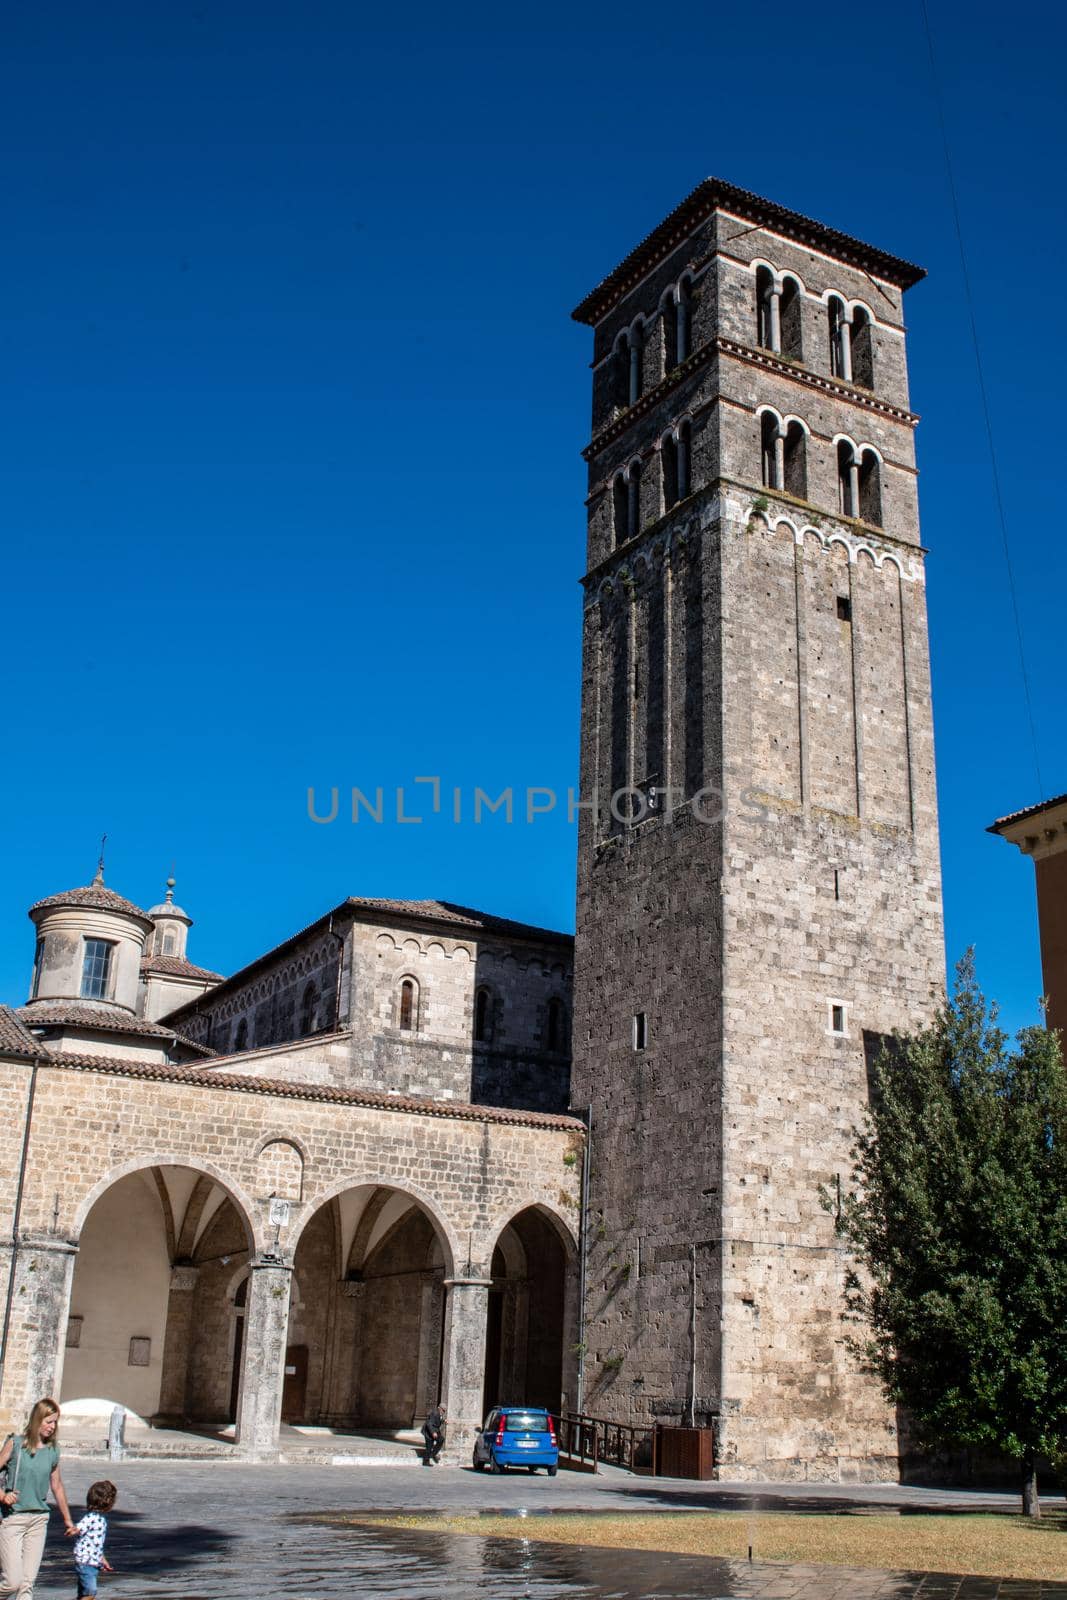 rieti detail of the cathedral of santa maria by carfedeph